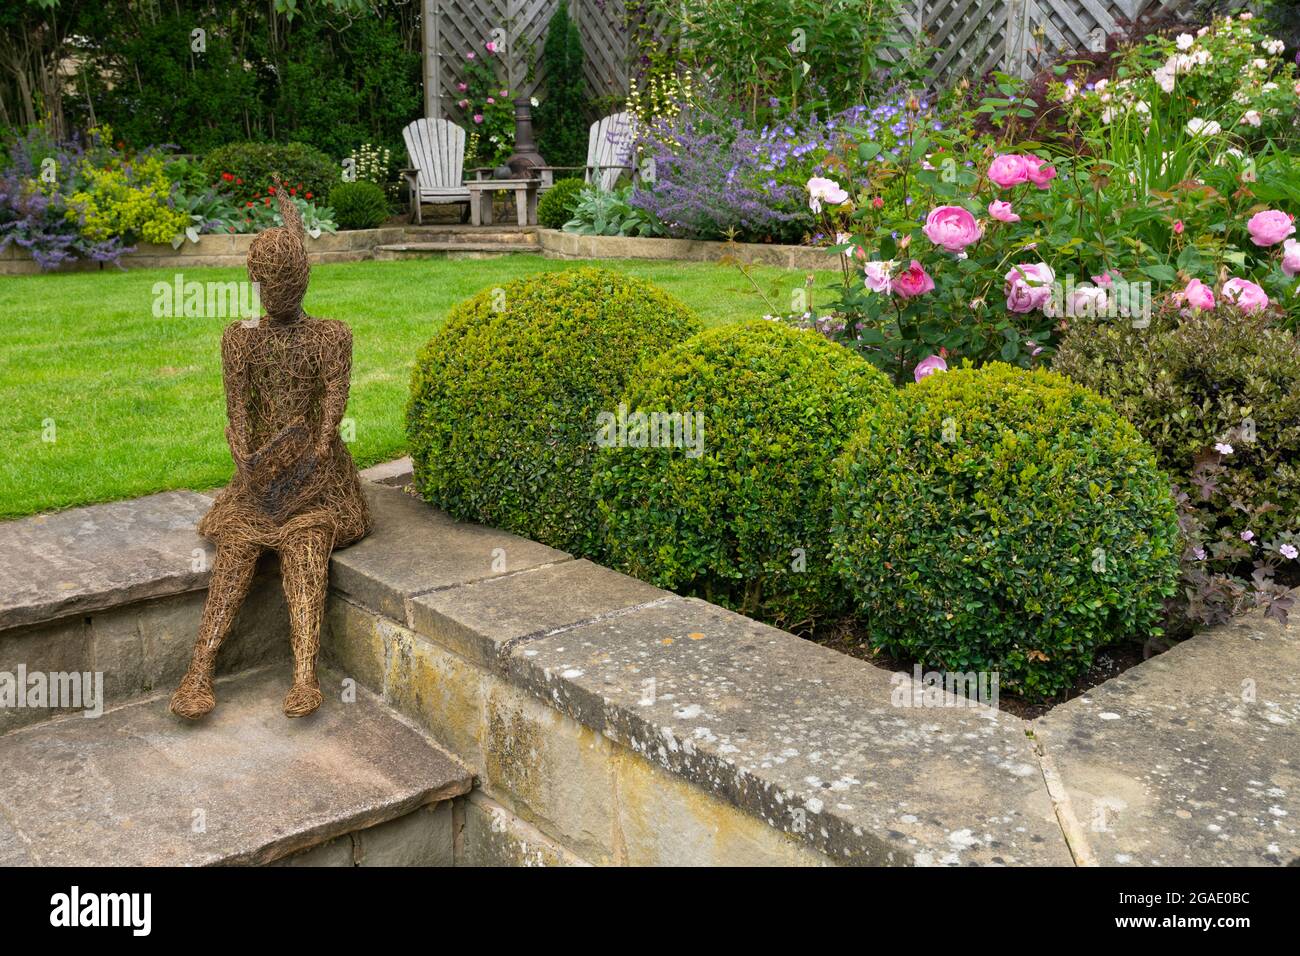 Sculpture art (ornamental feature) in beautiful colourful landscaped garden (flowering plants, shrubs, box balls, lawn, chairs) - Yorkshire England UK Stock Photo